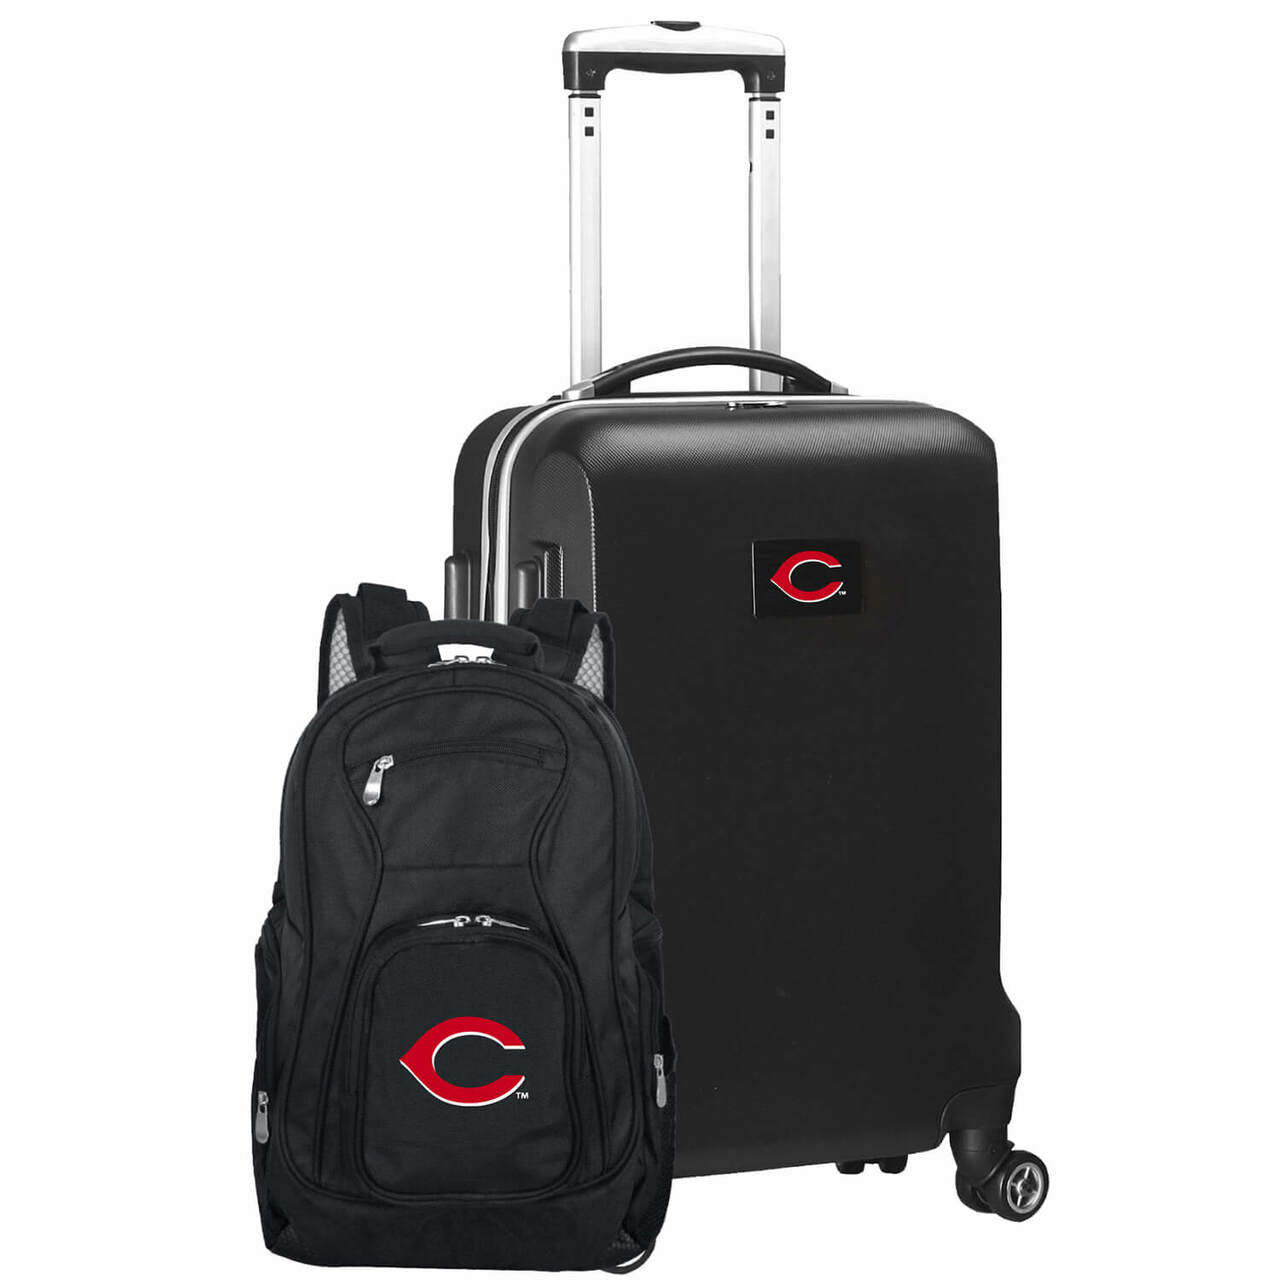 Cincinnati Reds Deluxe 2-Piece Backpack and Carry on Set in Black